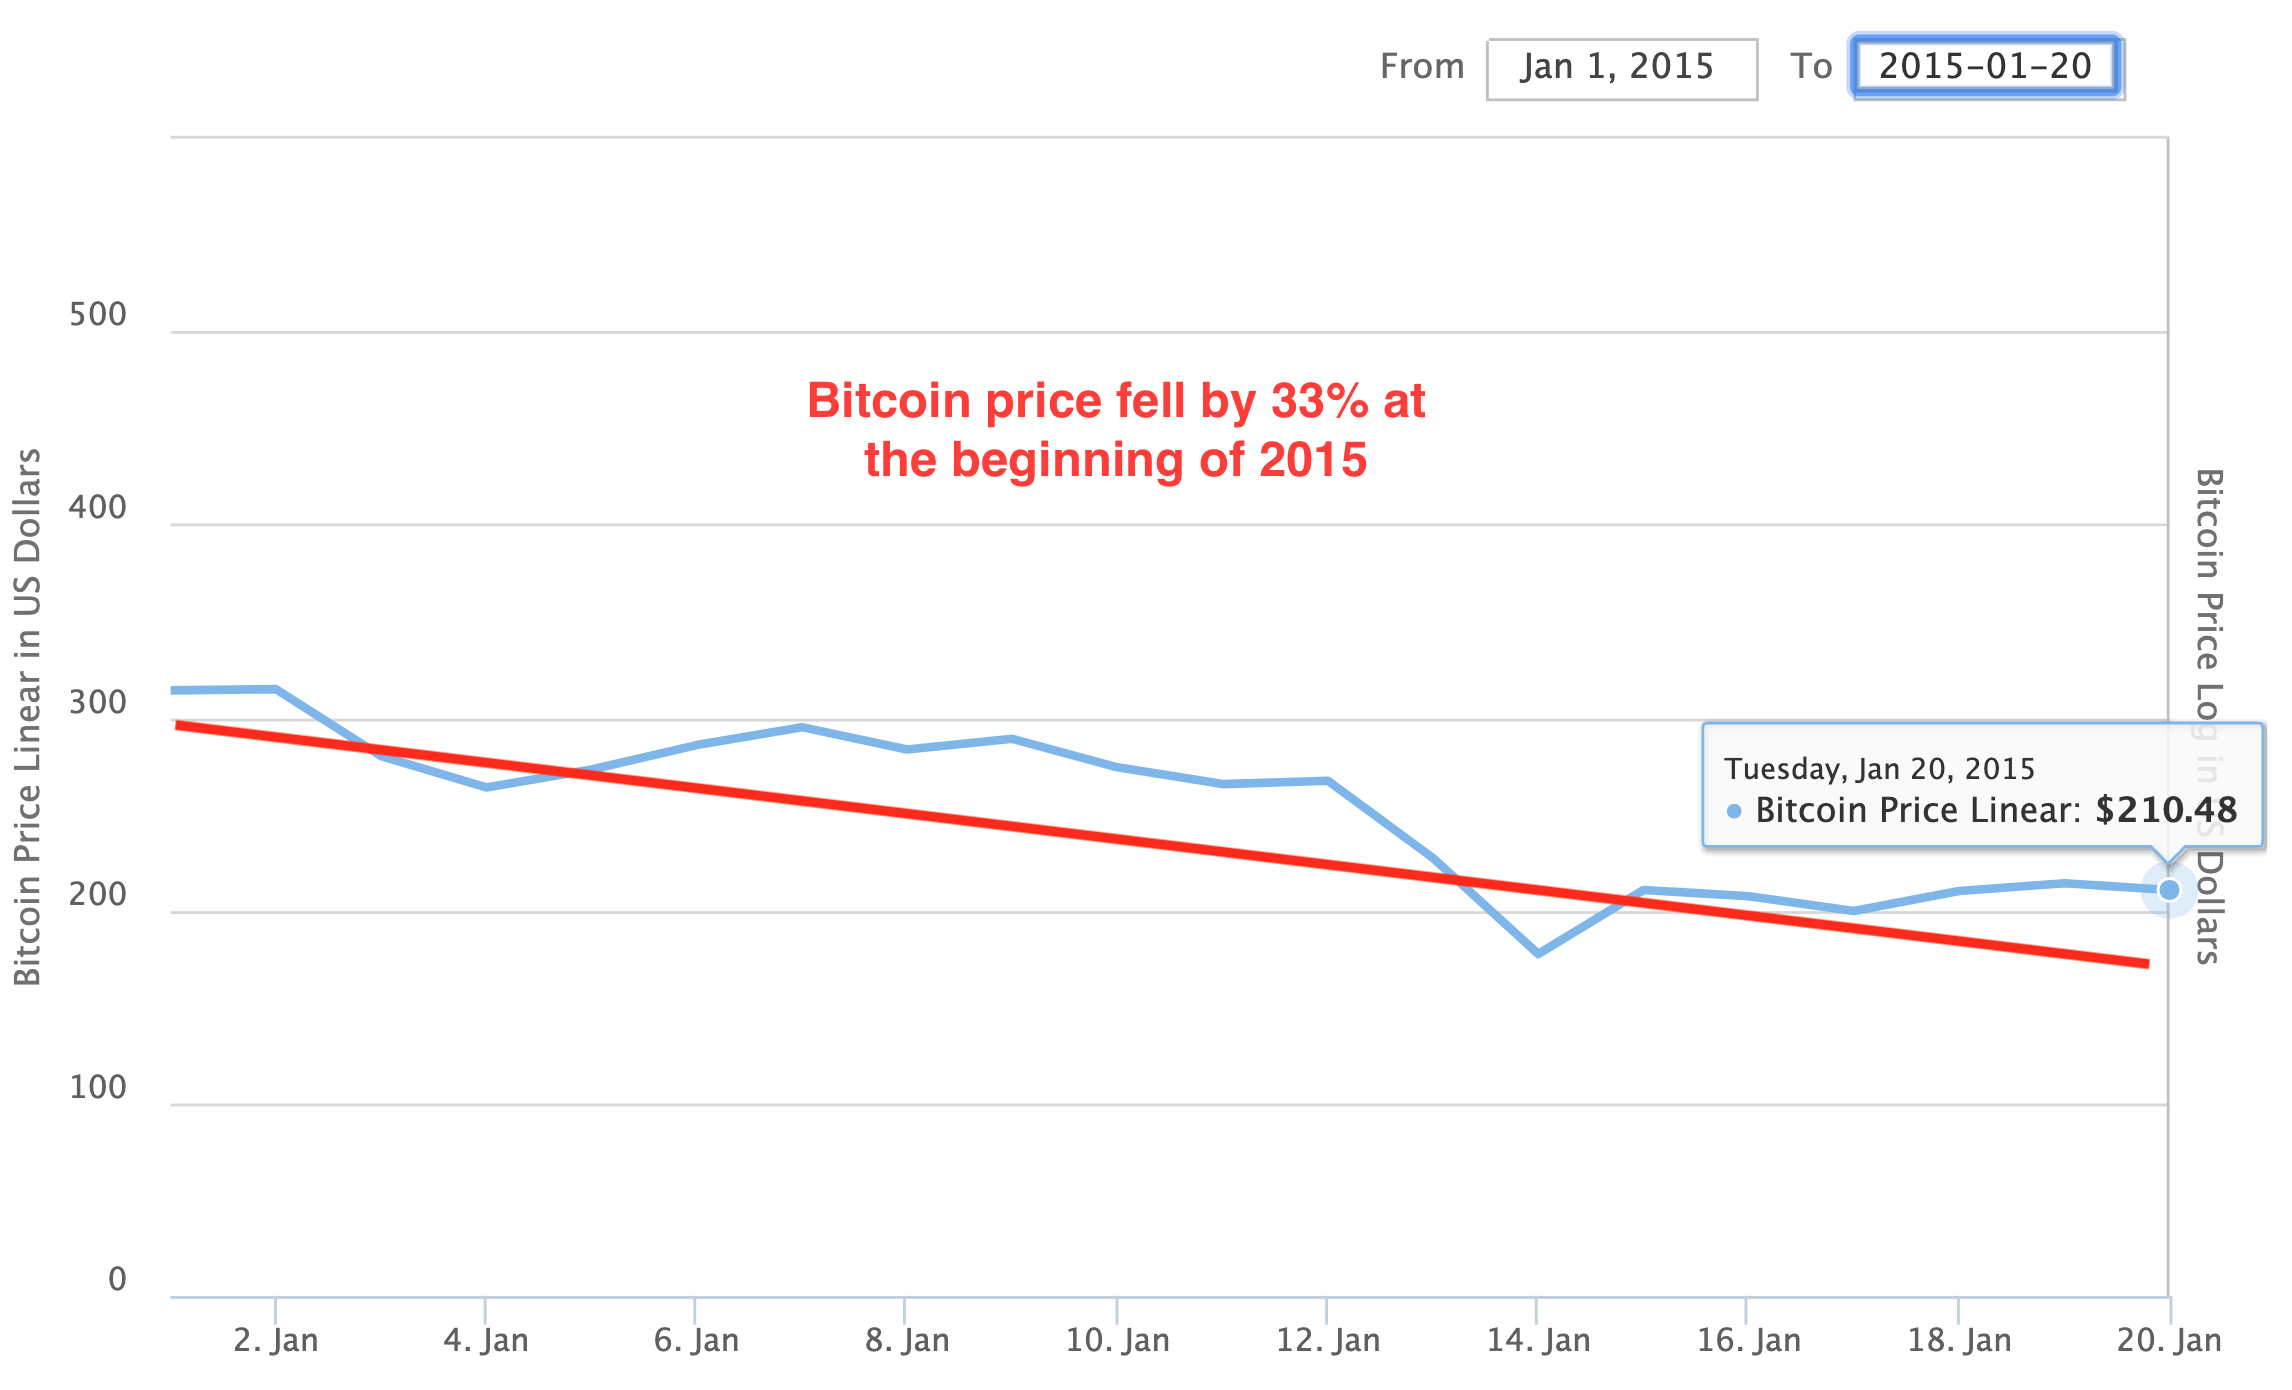 Bitcoin Price Has Recorded Its Best Start Since 2012 But Its Strongest Increase Is Expected In 2021 By Sylvain Saurel In Bitcoin We Trust Medium